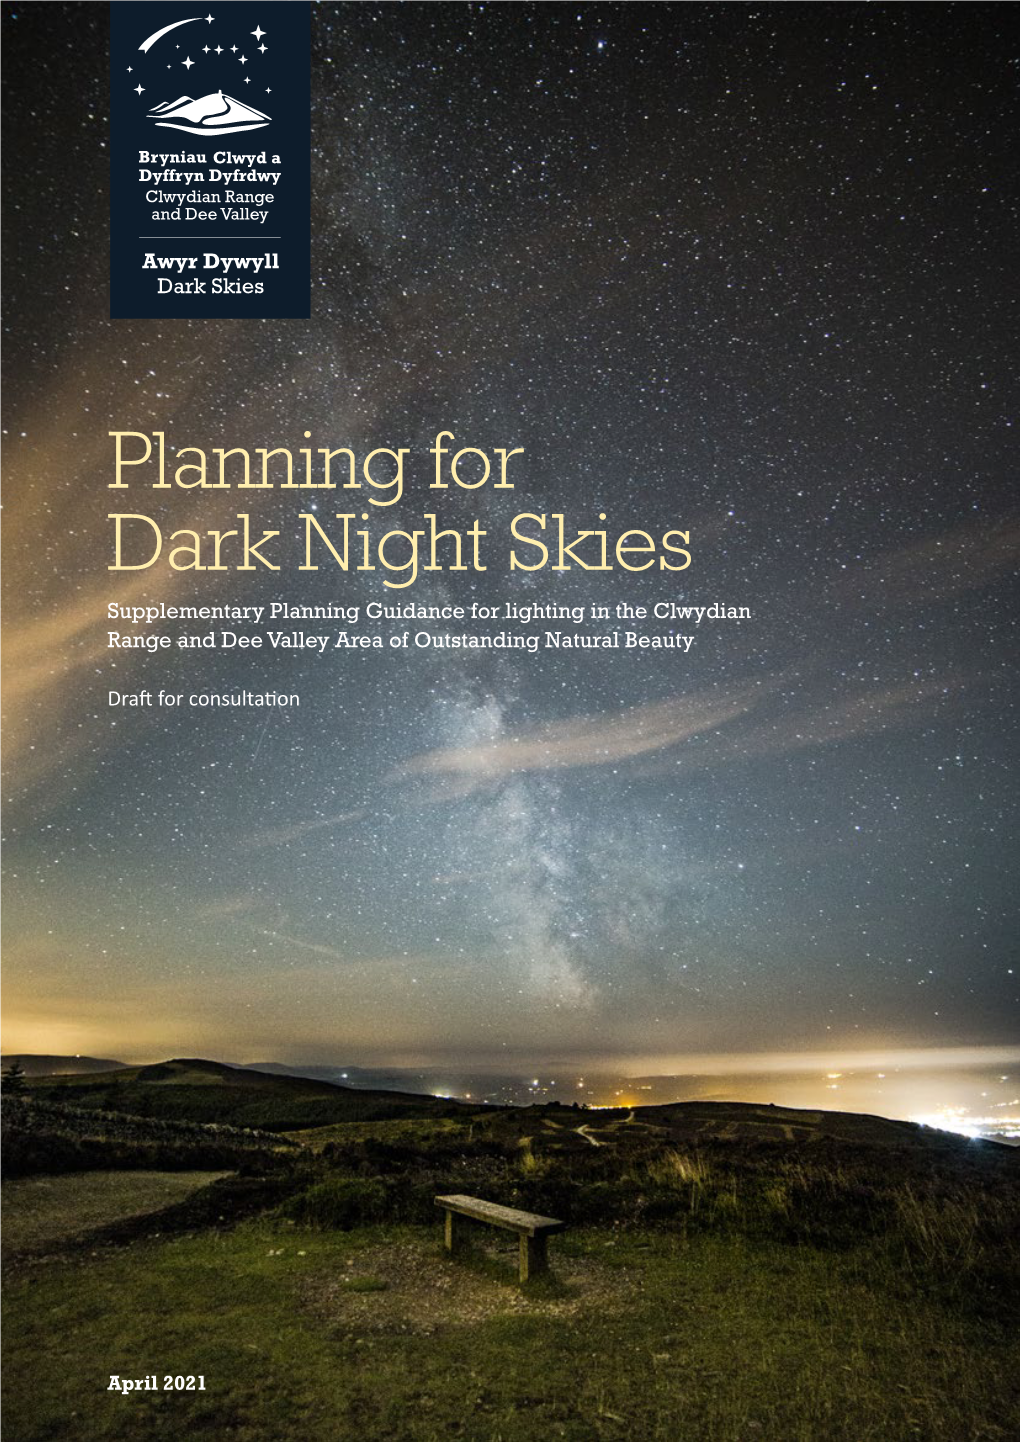 Planning for Dark Night Skies Supplementary Planning Guidance for Lighting in the Clwydian Range and Dee Valley Area of Outstanding Natural Beauty